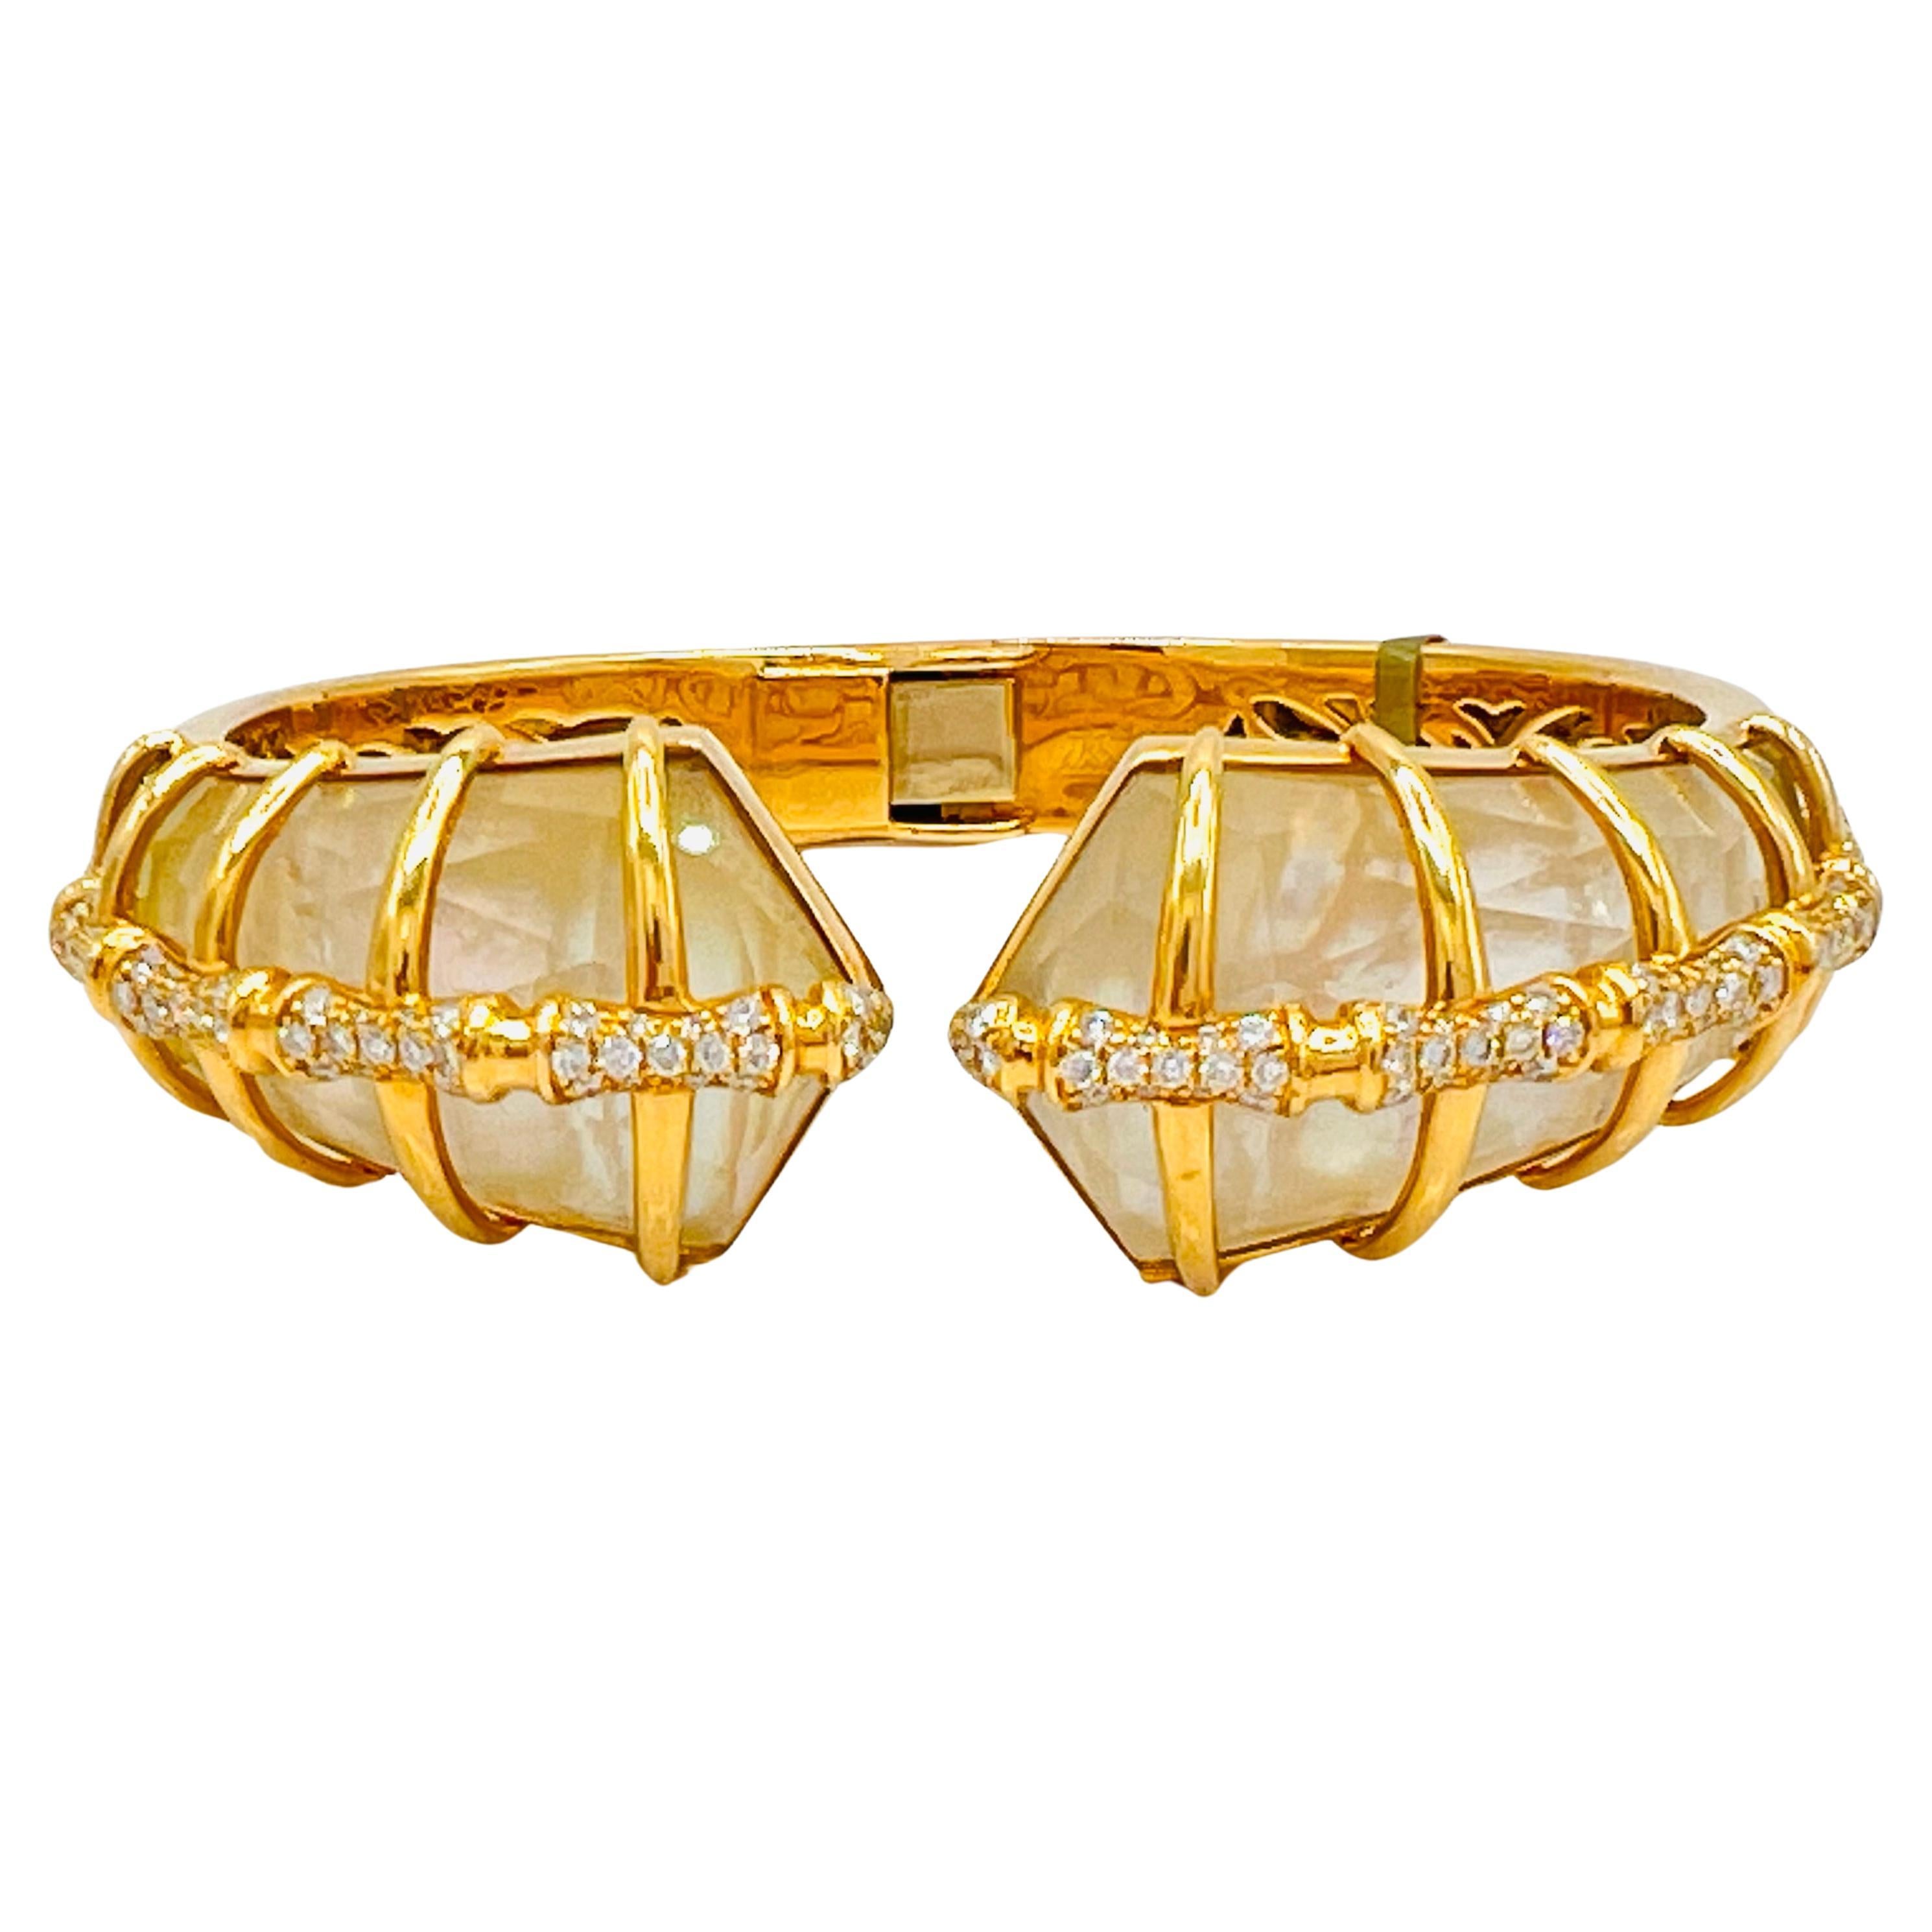 Estate Stephen Webster White Diamond and Crystal Bangle in 18K Yellow Gold For Sale